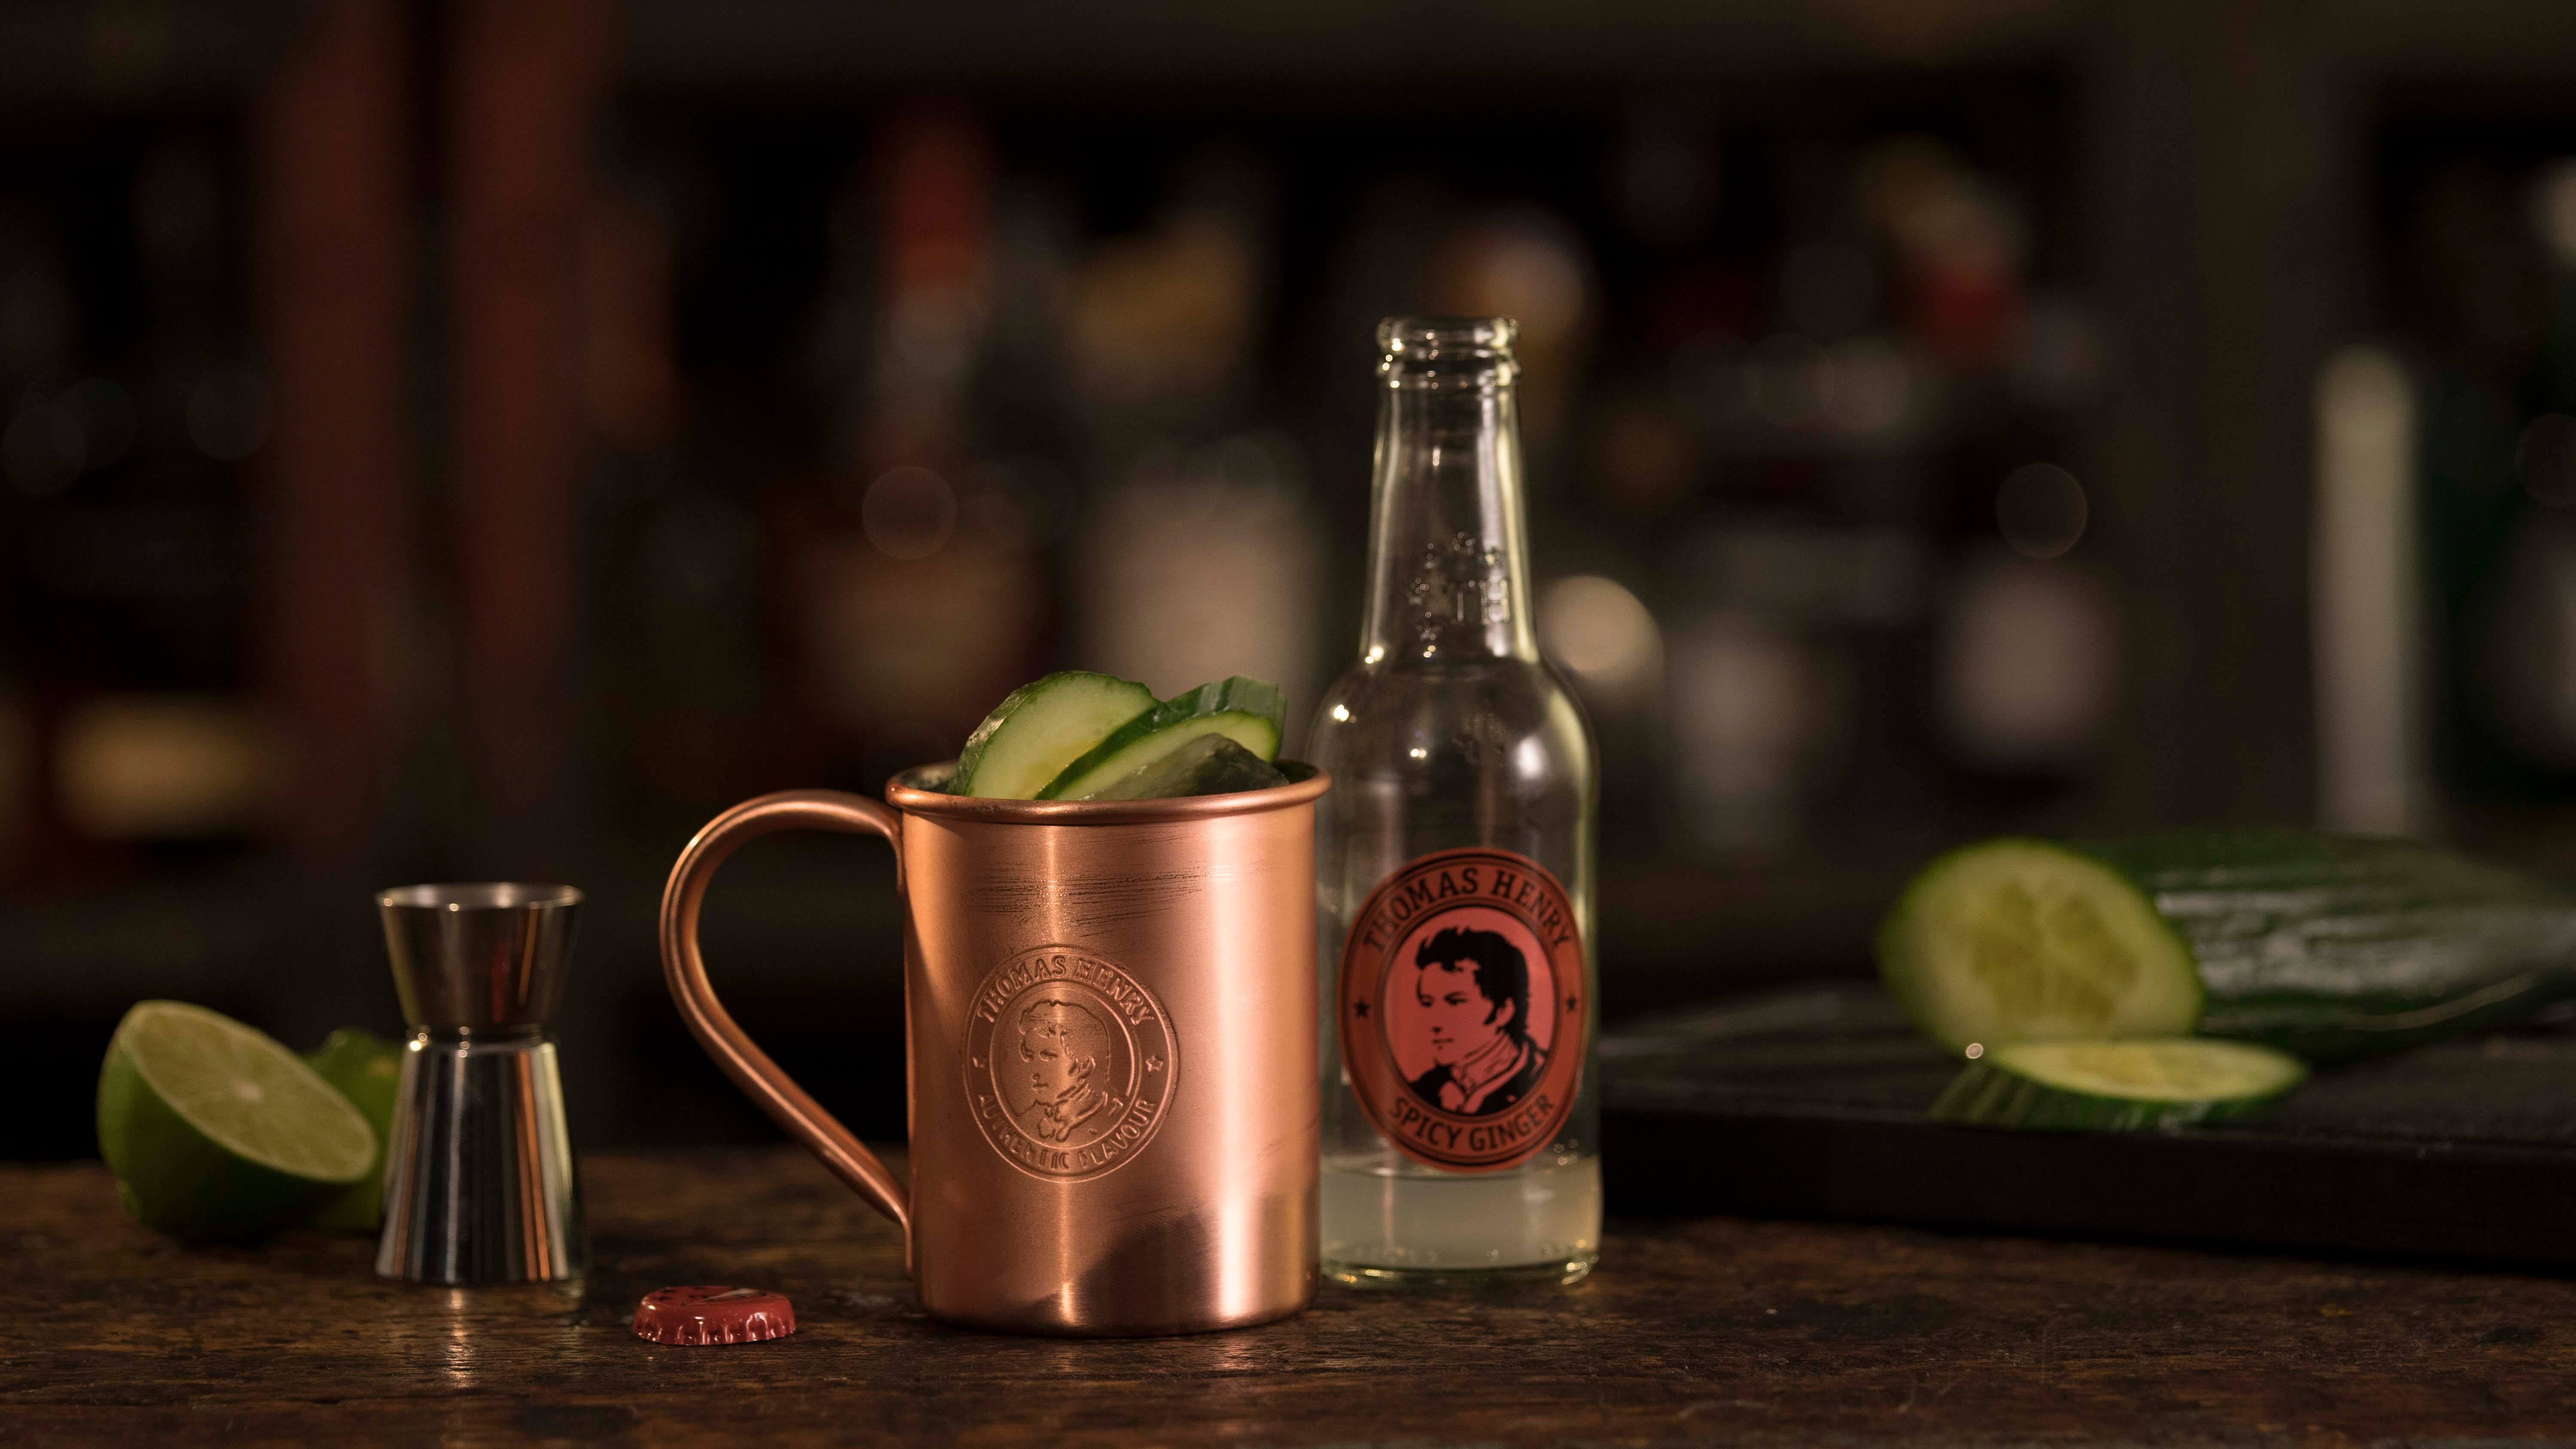 Der Moscow Mule mit Thomas Henry Spicy Ginger